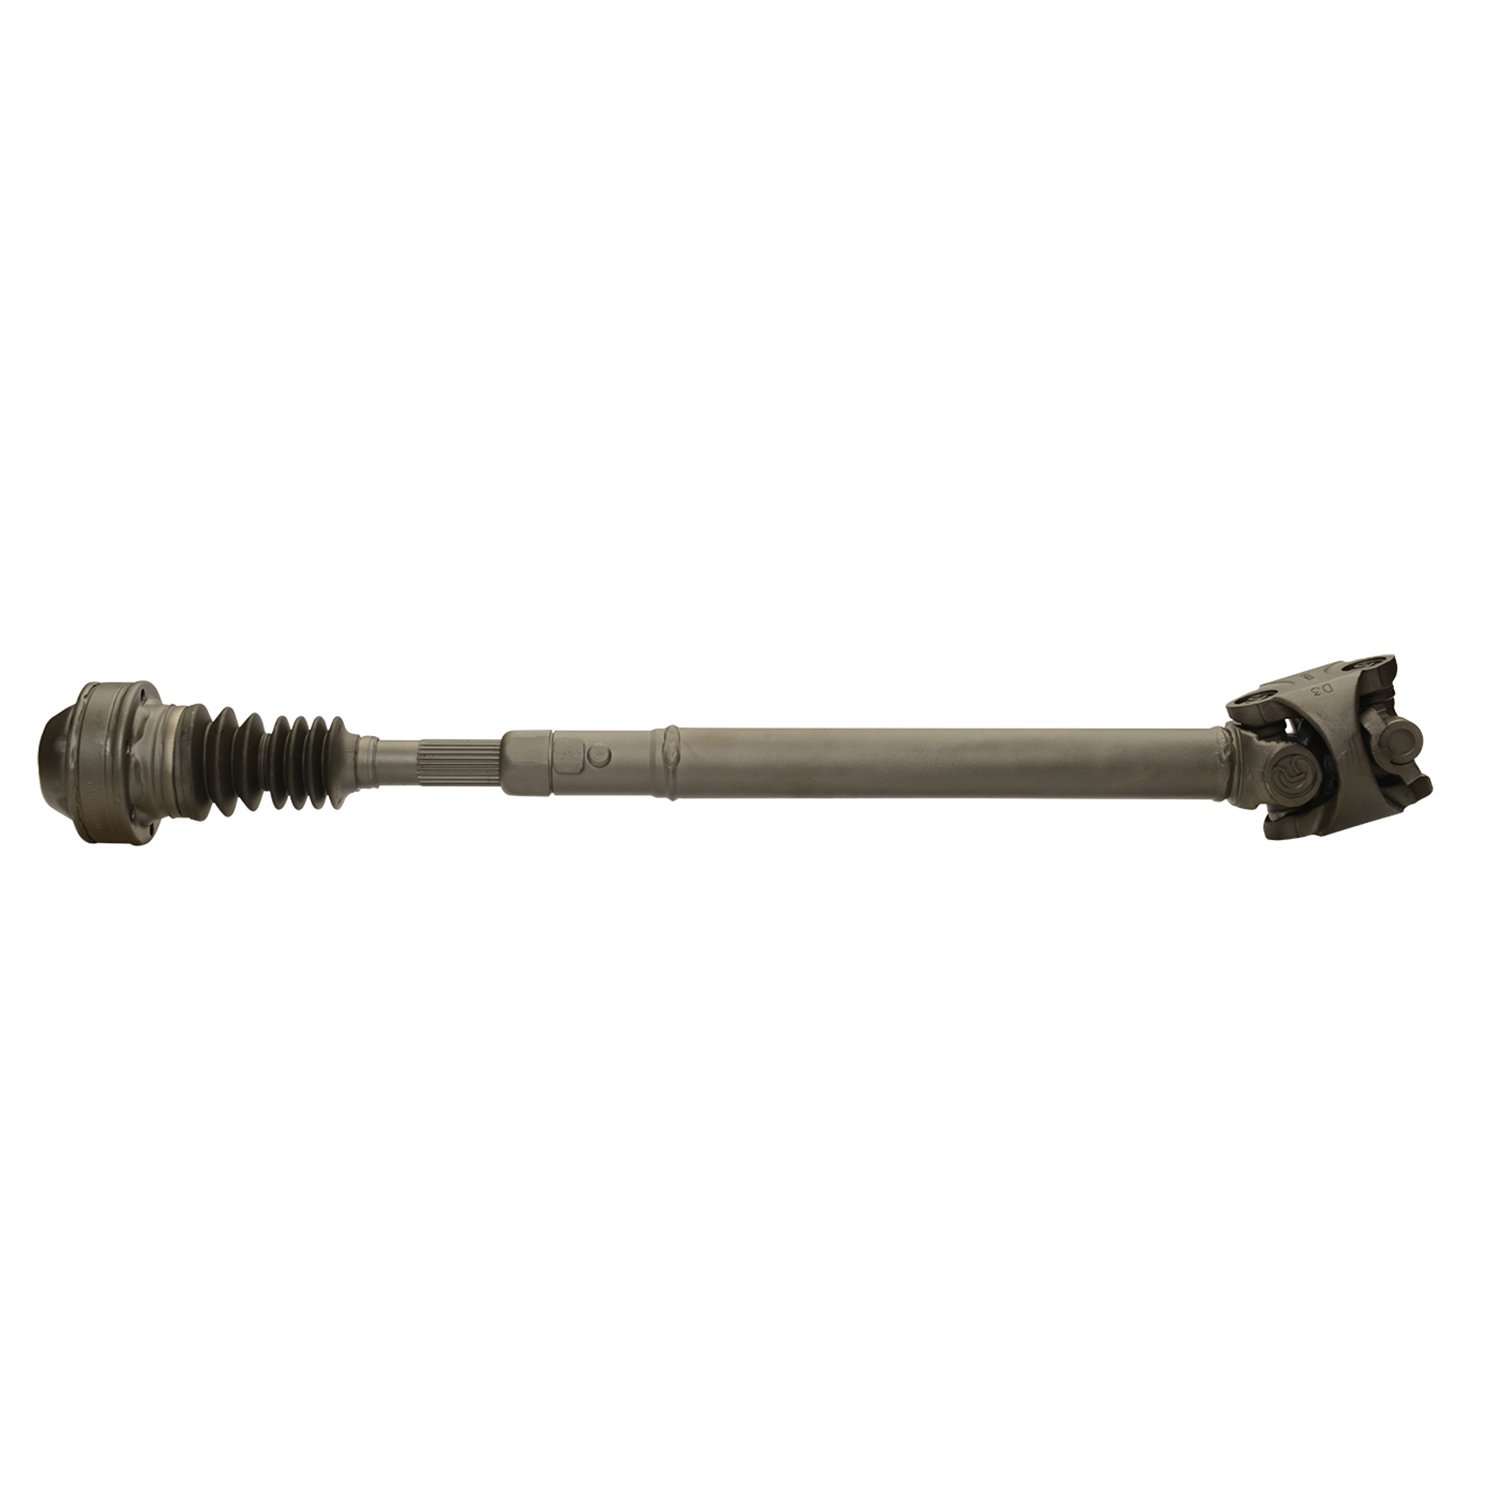 USA Standard ZDS9771 Front Driveshaft, For Grand Cherokee, 32-7/8 in. Flange To Center